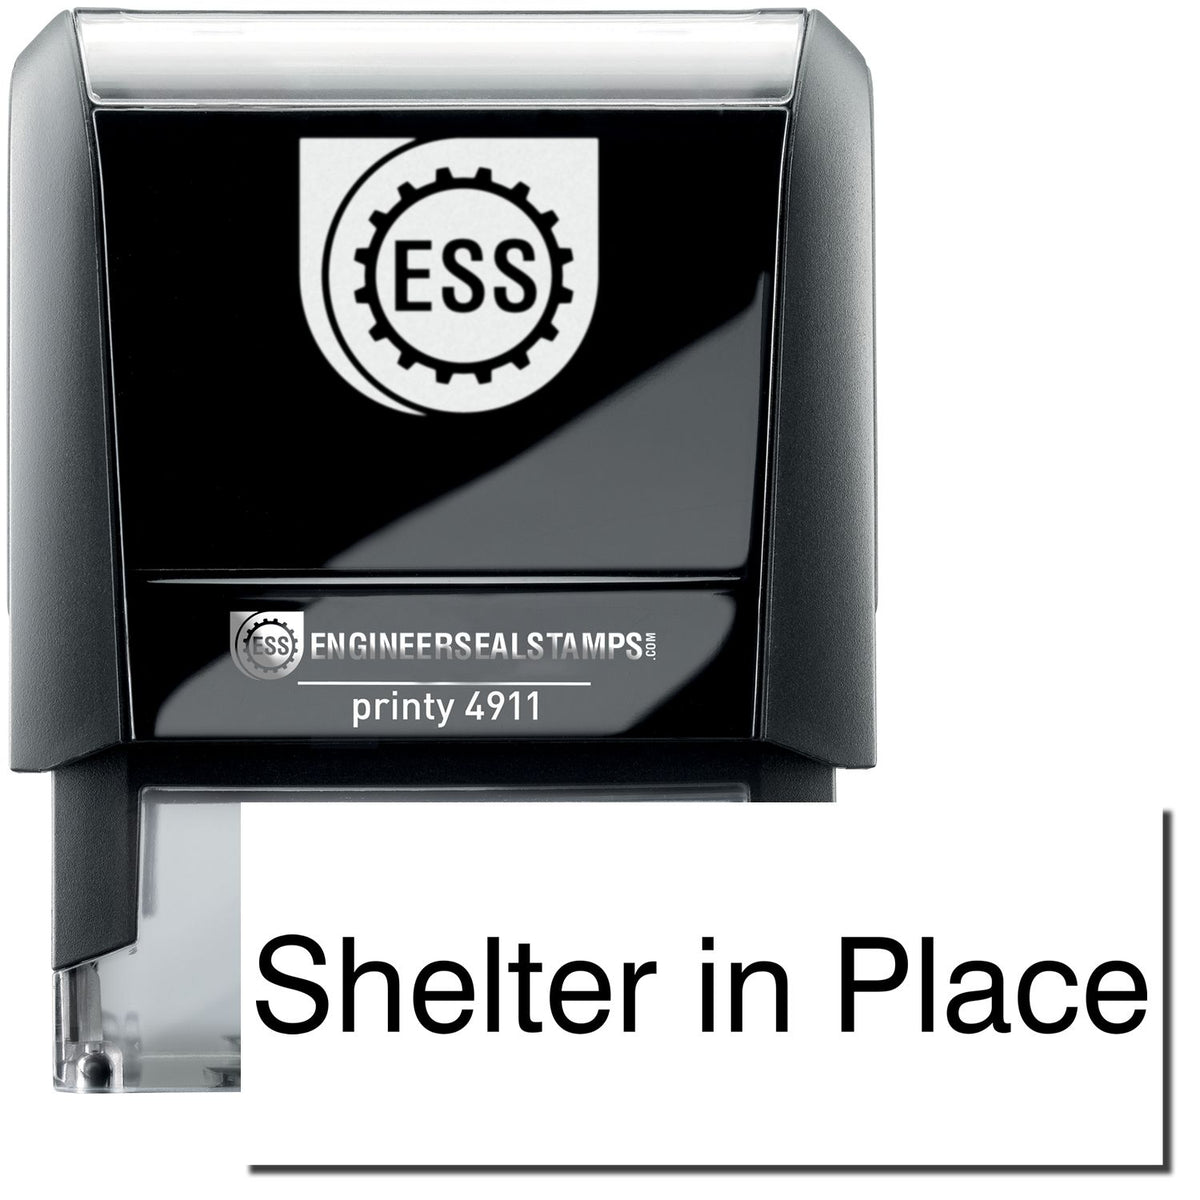 A self-inking stamp with a stamped image showing how the text &quot;Shelter in Place&quot; is displayed after stamping.